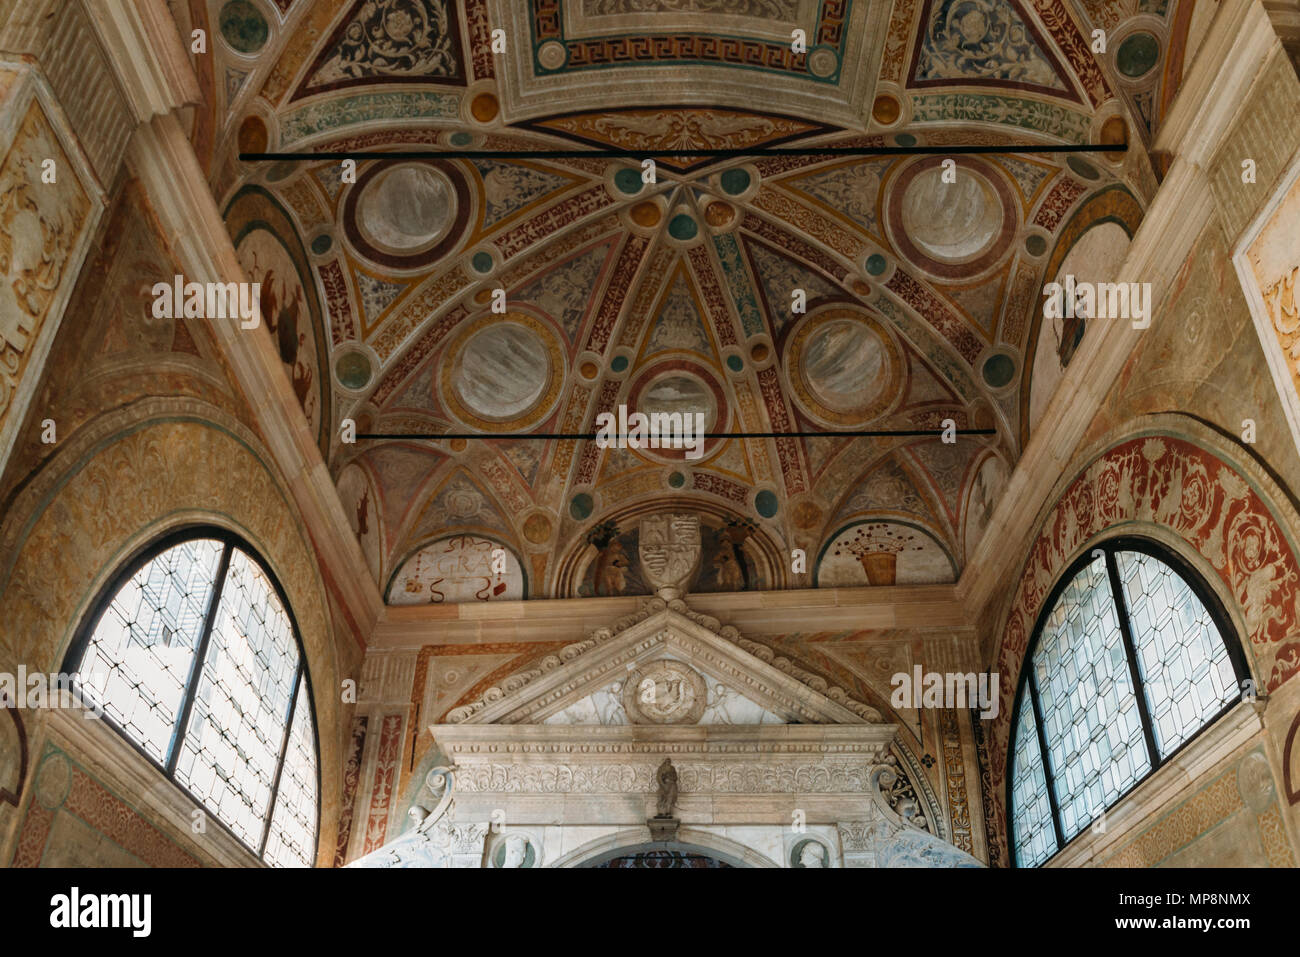 Certosa di Pavia, Italy - May 18, 2018: Ceiling of the Certosa di Pavia, typical of the Lombard architecture and combines Gothic and Renaissance style Stock Photo